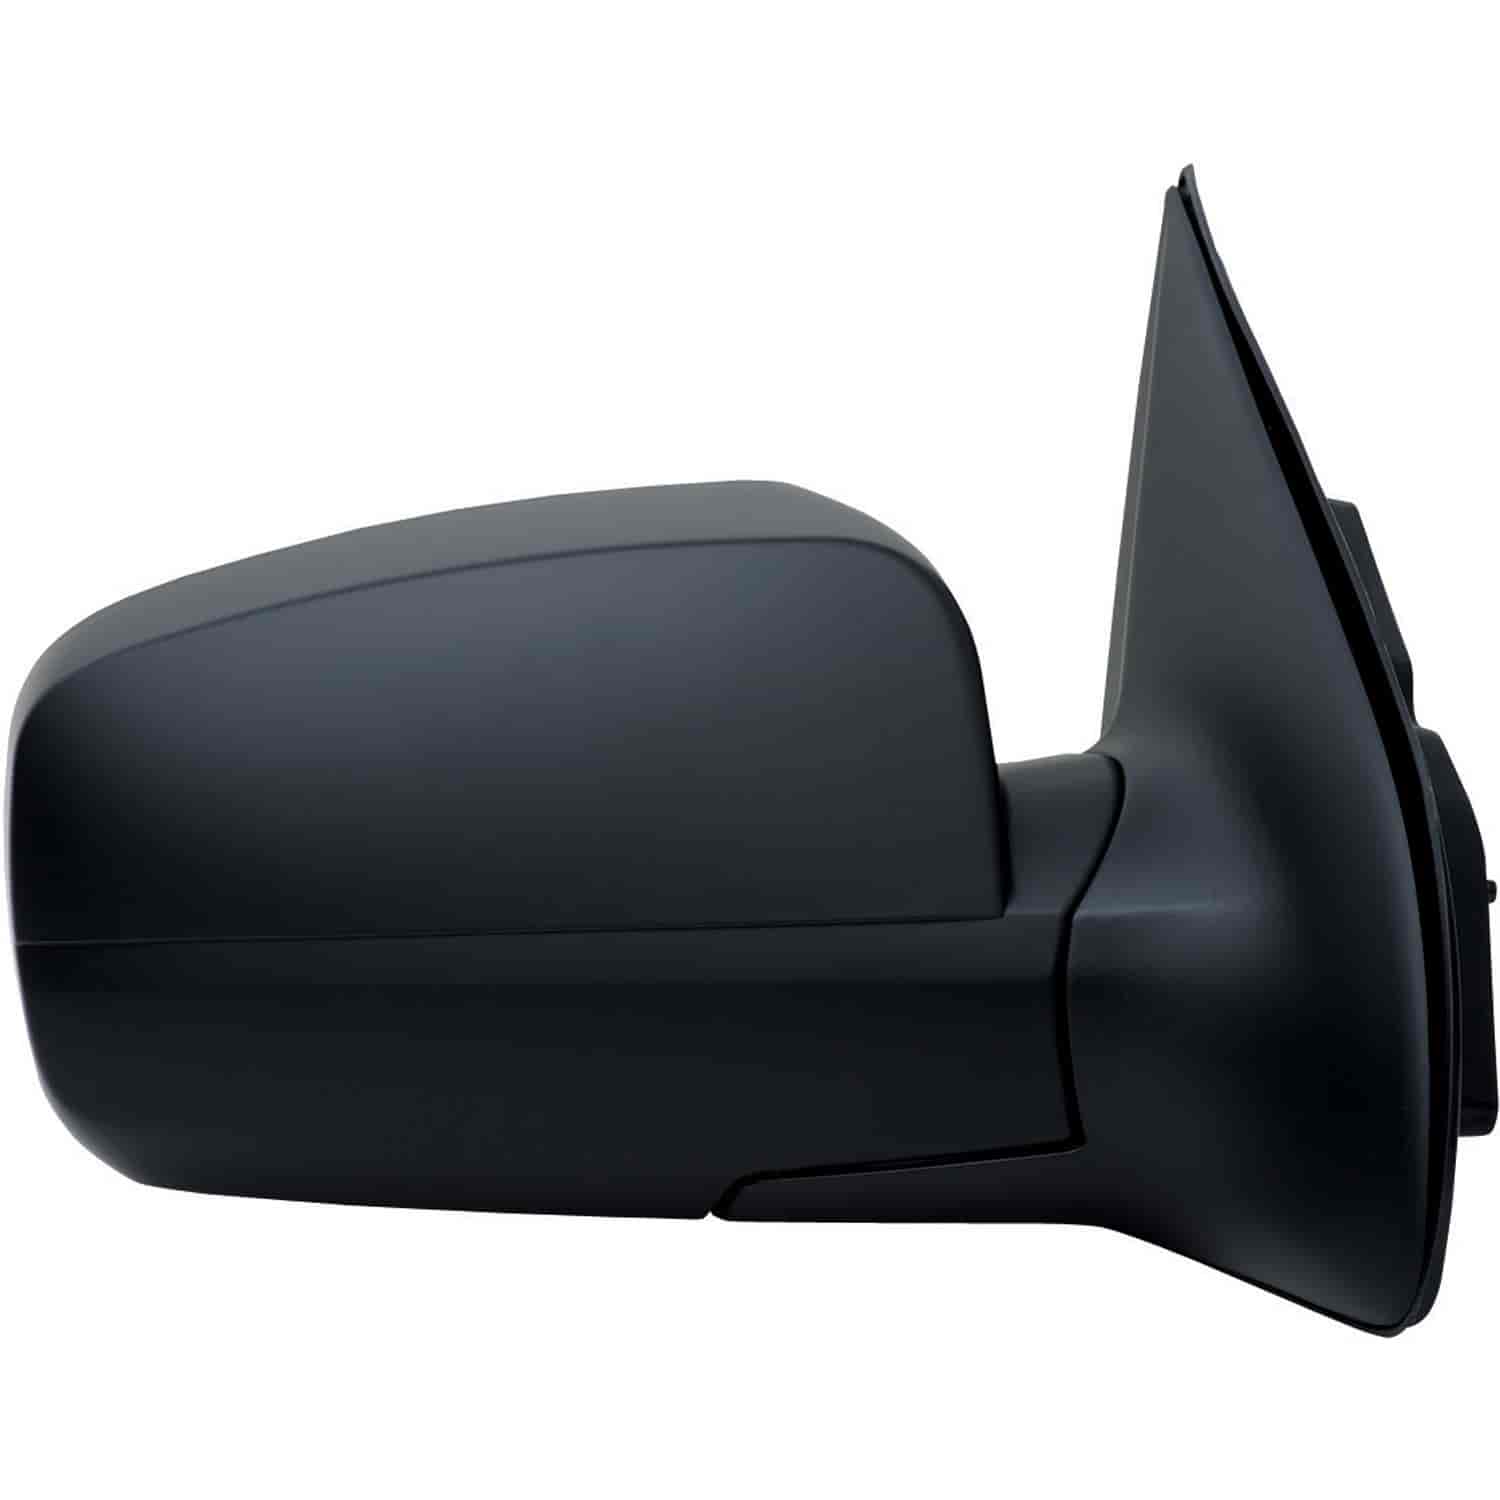 OEM Style Replacement mirror for 03-09 Kia Sorento EX model passenger side mirror tested to fit and